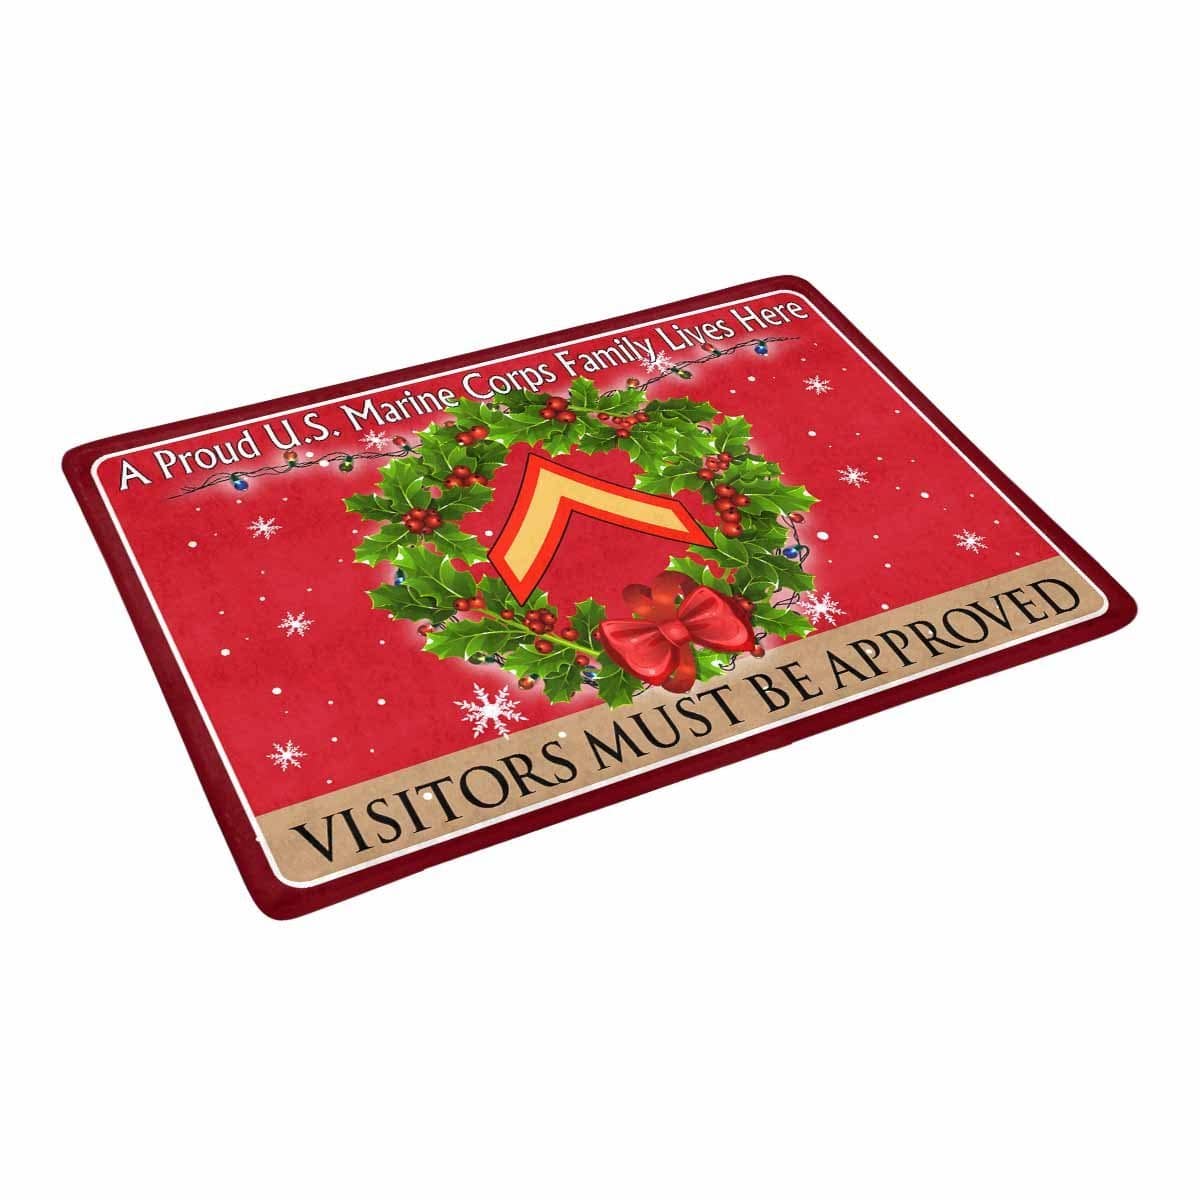 USMC E-2 Private First Class E2 PFC Ranks - Visitors must be approved-Doormat-USMC-Ranks-Veterans Nation